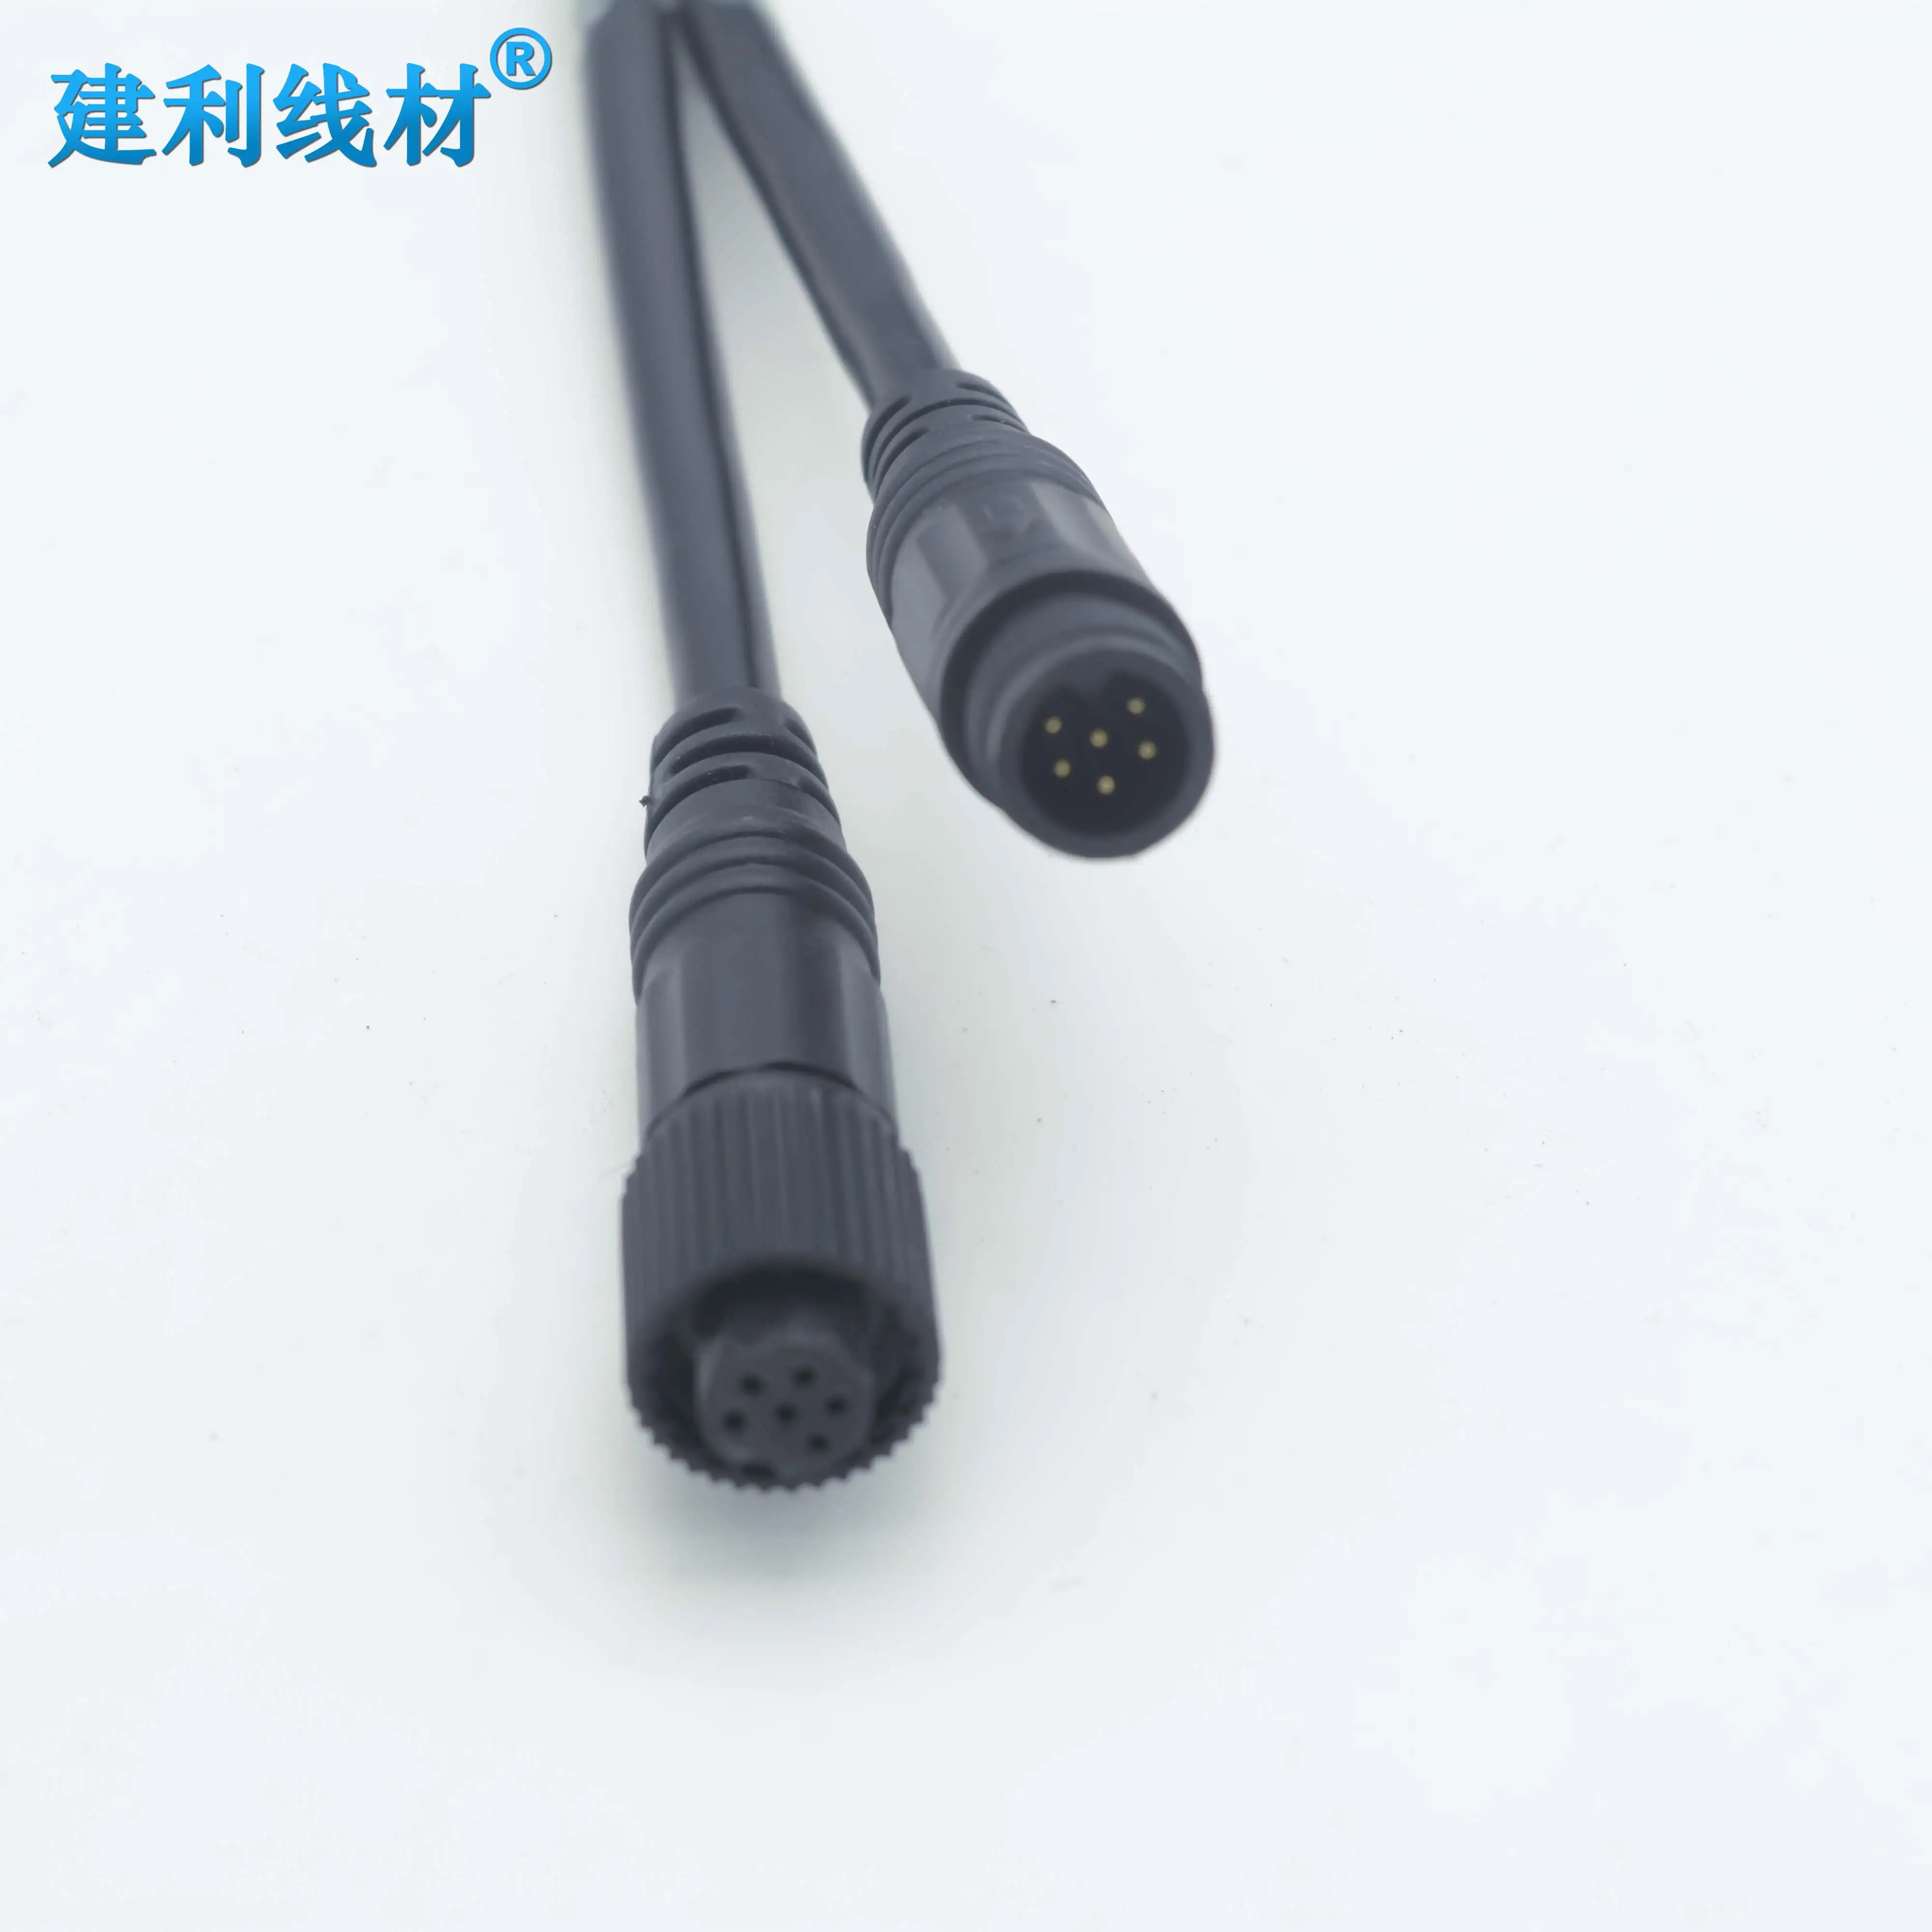 M10 6Pin Male-Female Extension Cable 5.0 OD for Vehicle Camera System for Wiring Harness trailer harness bus cable harness